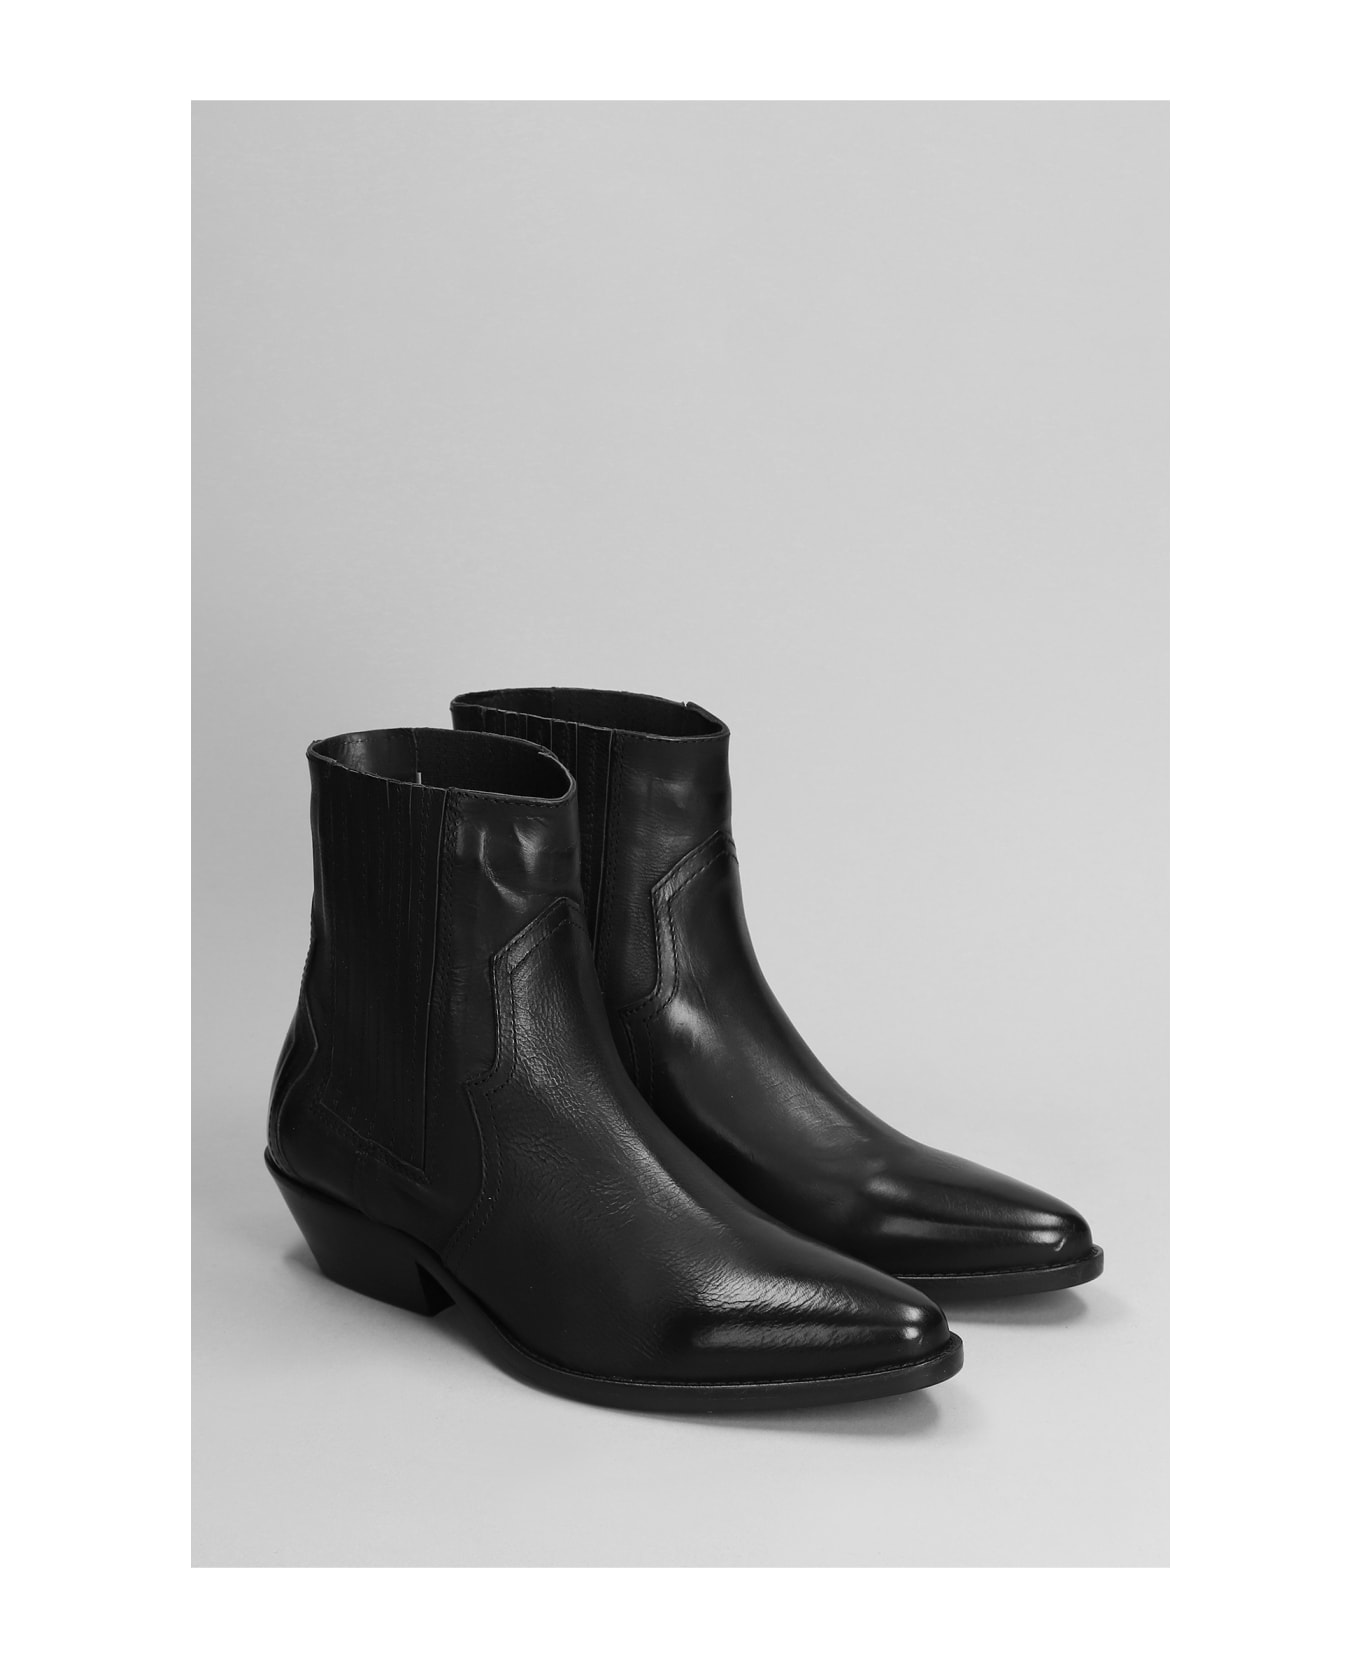 Julie Dee Texan Ankle Boots In Black Leather - black